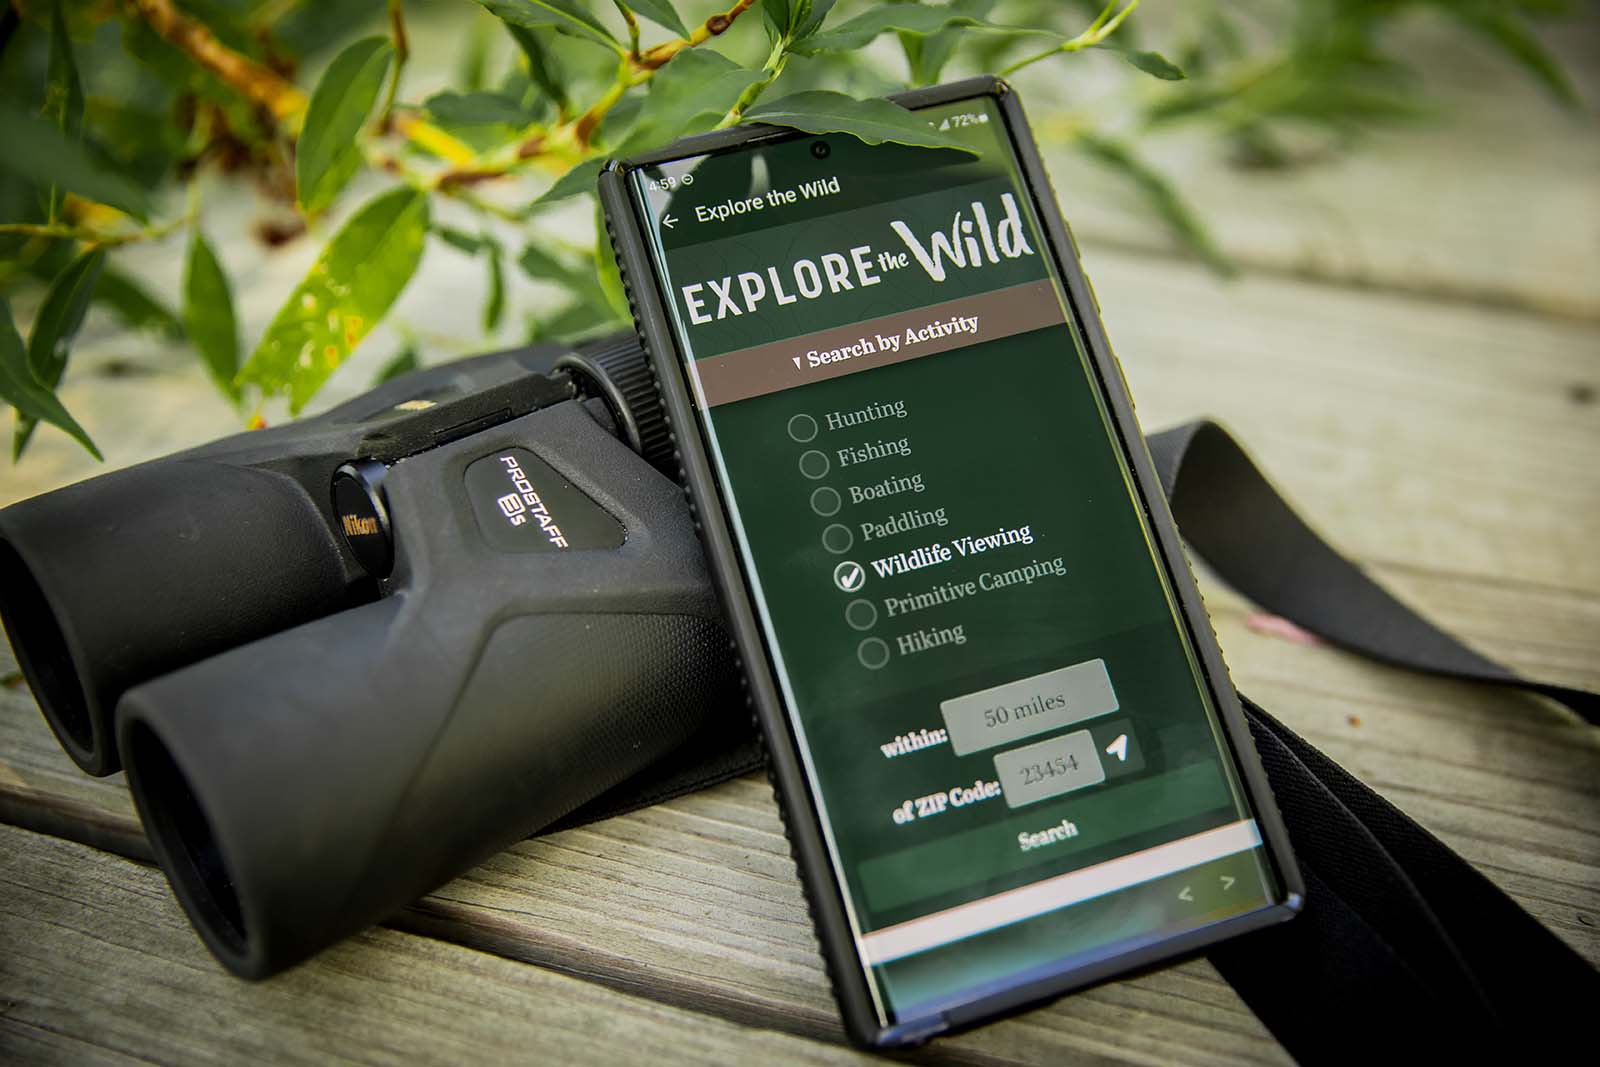 A smartphone showing the Explore the Wild web app, resting against a pair of binoculars